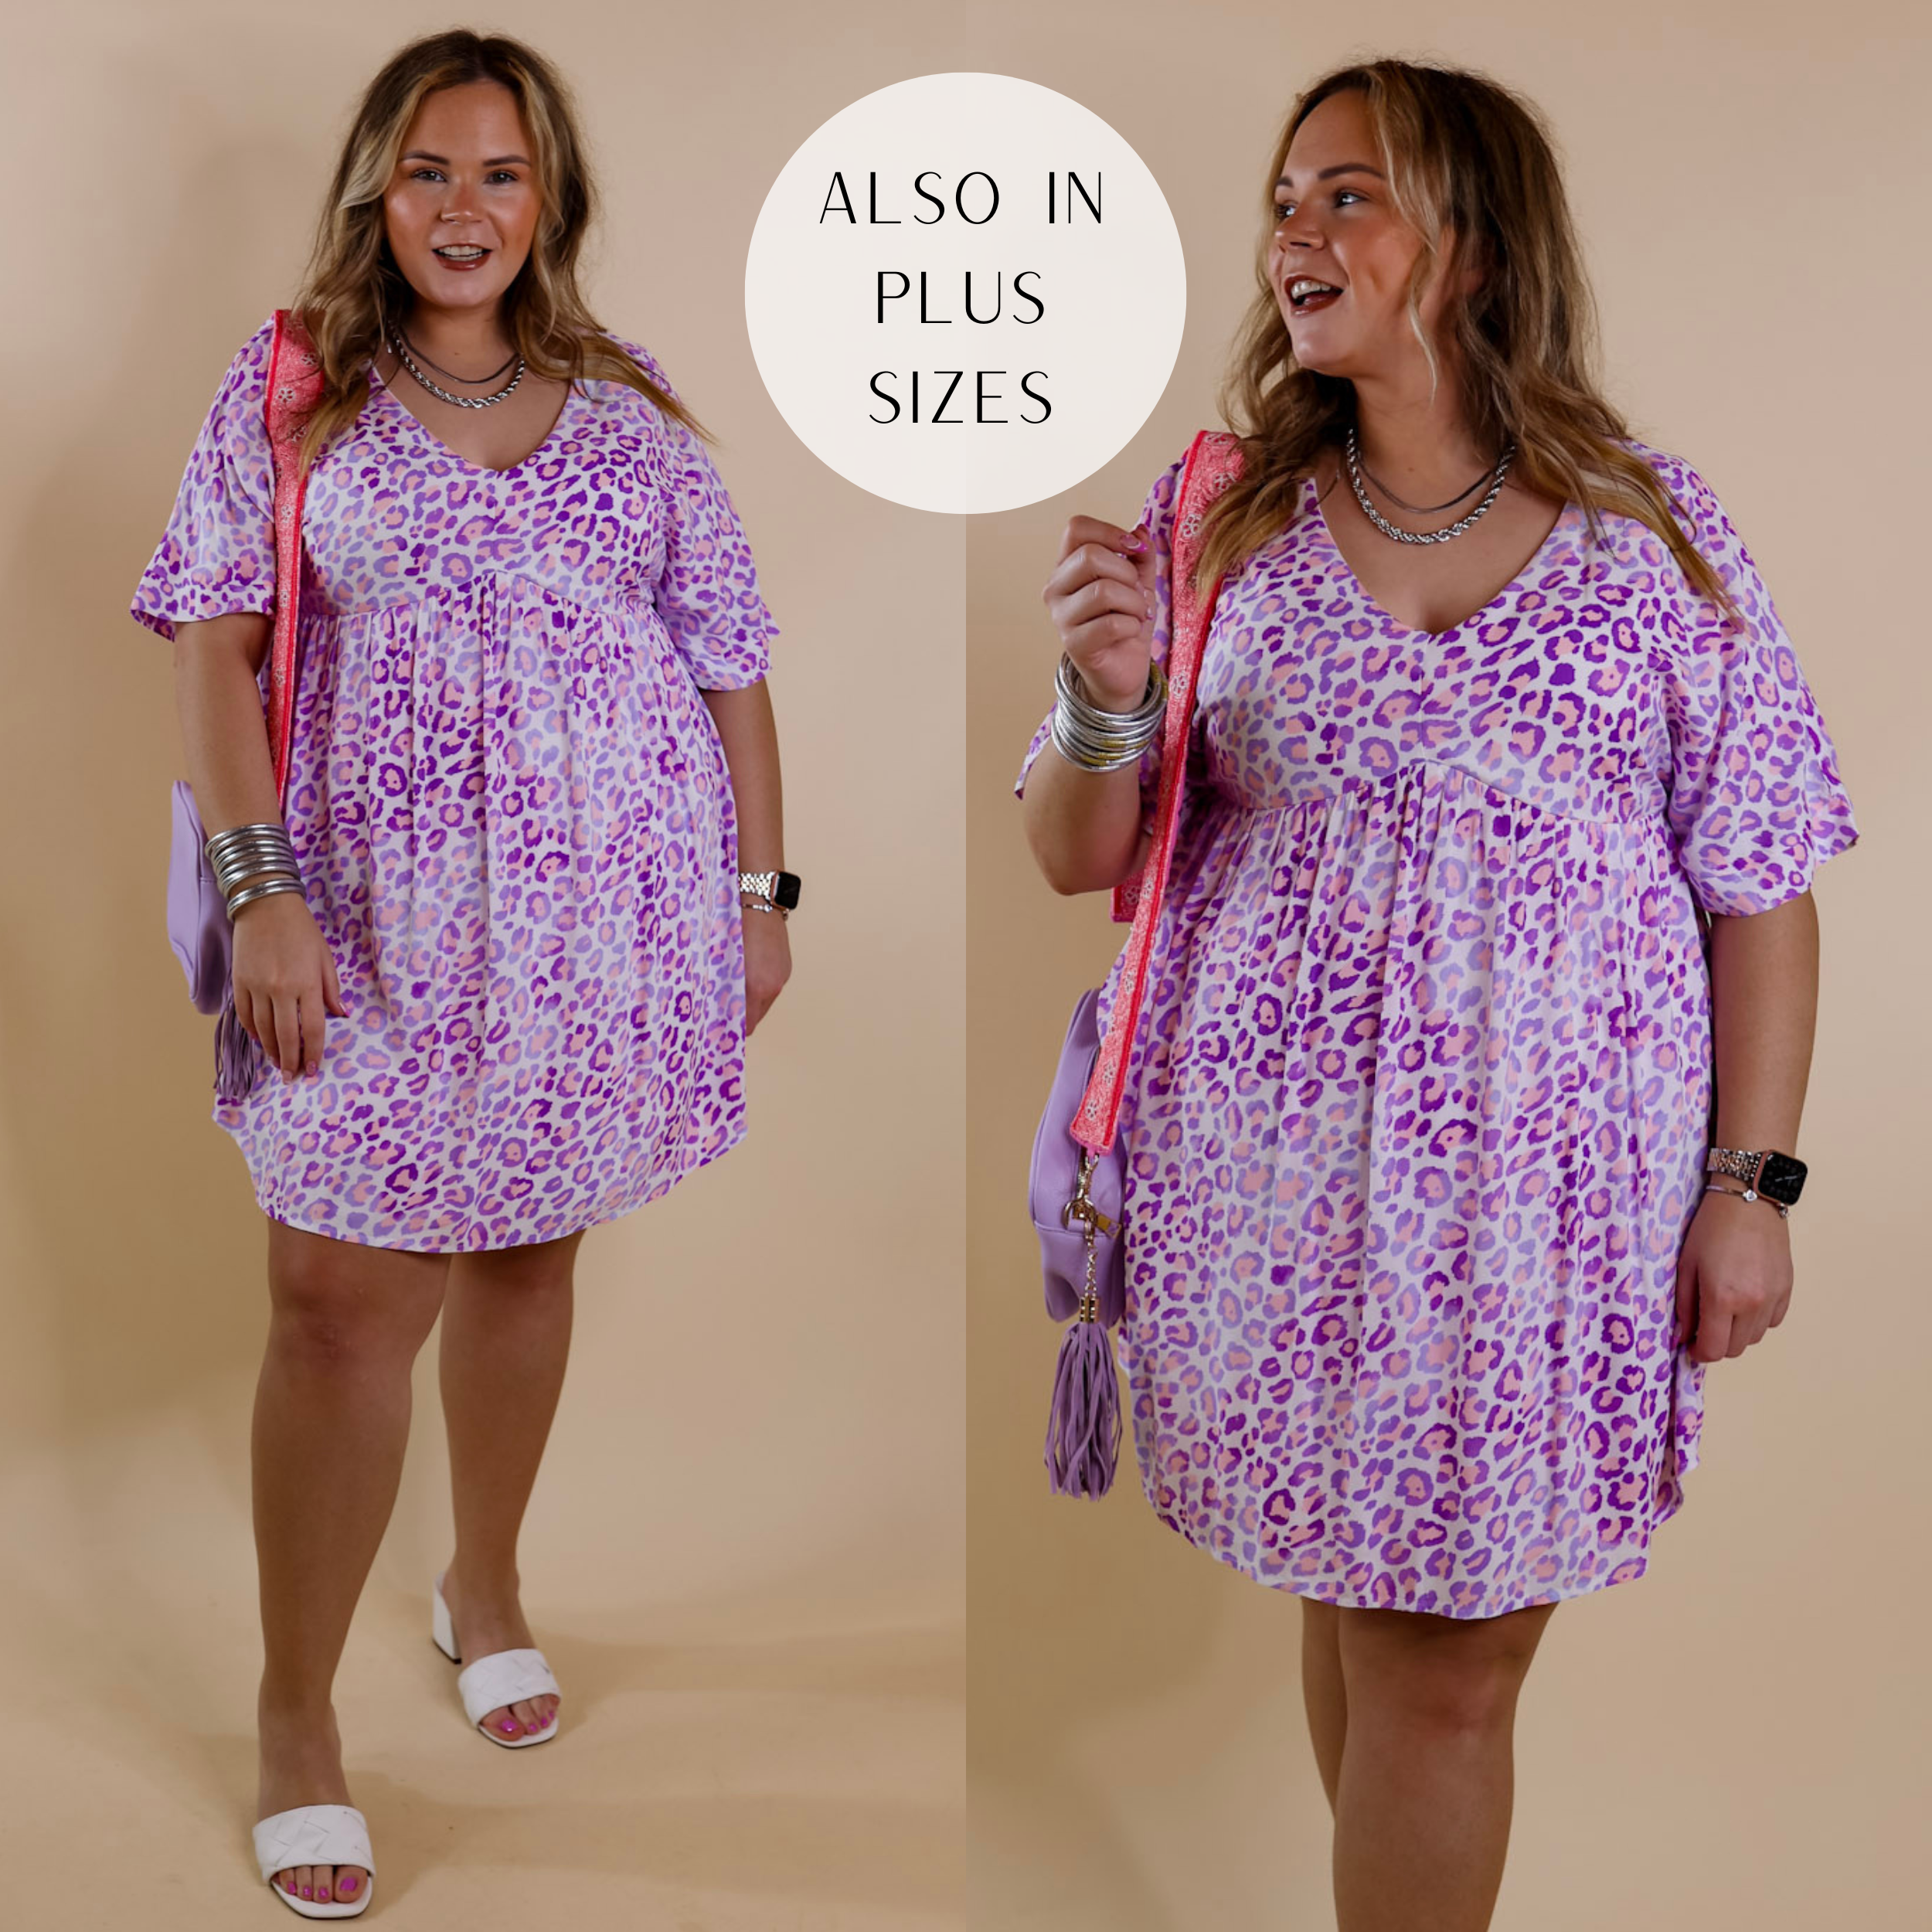 Model is wearing a knee-length babydoll style dress with short sleeves and a v neck. This dress is a purple leopard print pattern on an ivory background. Model has it paired with white sandals, silver jewelry, and a purple purse.